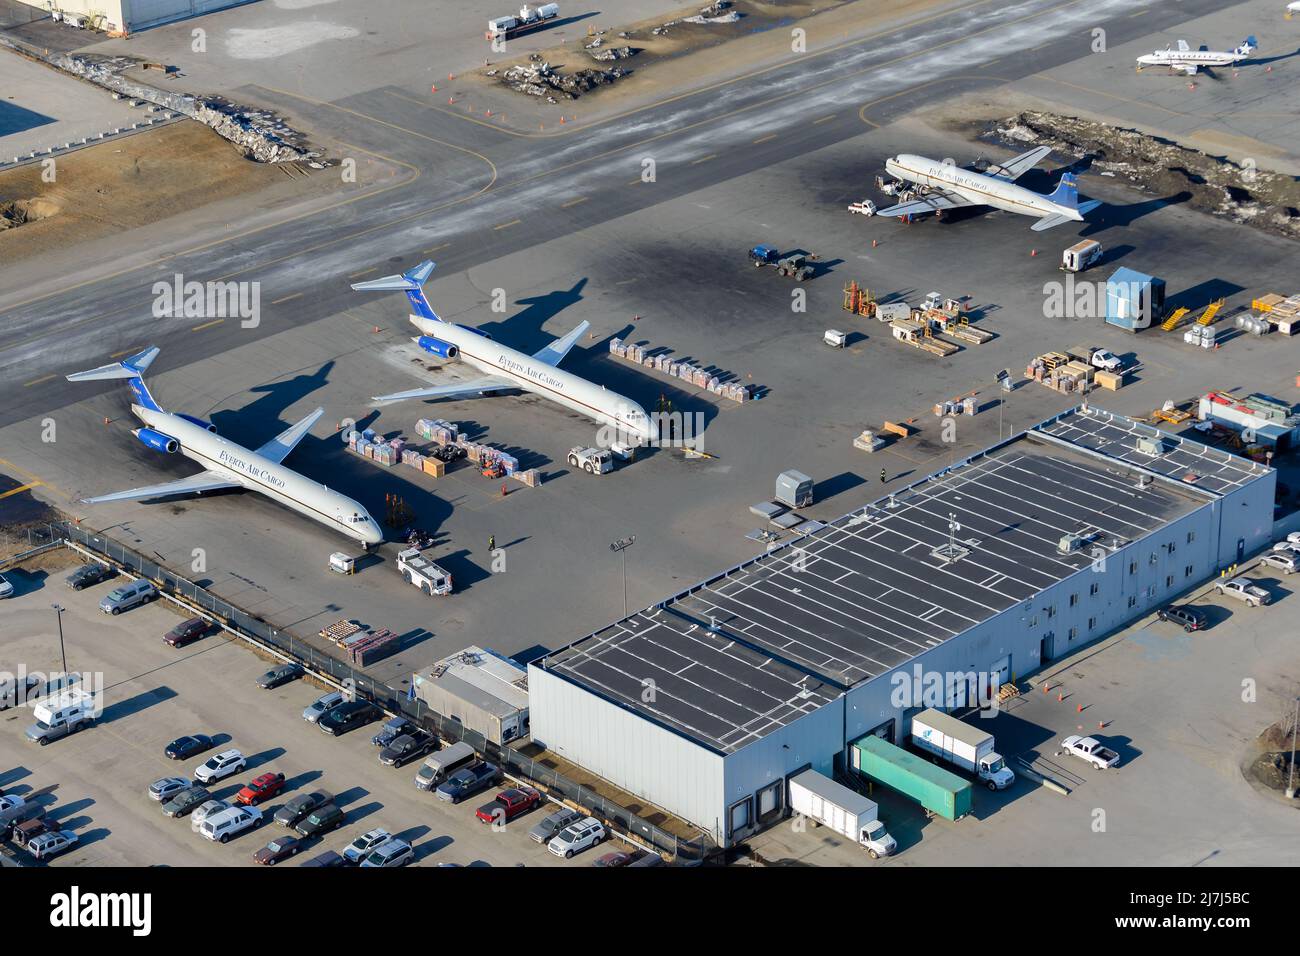 Everts Air Cargo hub in Anchorage Airport. Airplanes MD-82, MD-83 and DC-6 of Everts Air Cargo, an freighter airline with classic airplanes in Alaska. Stock Photo